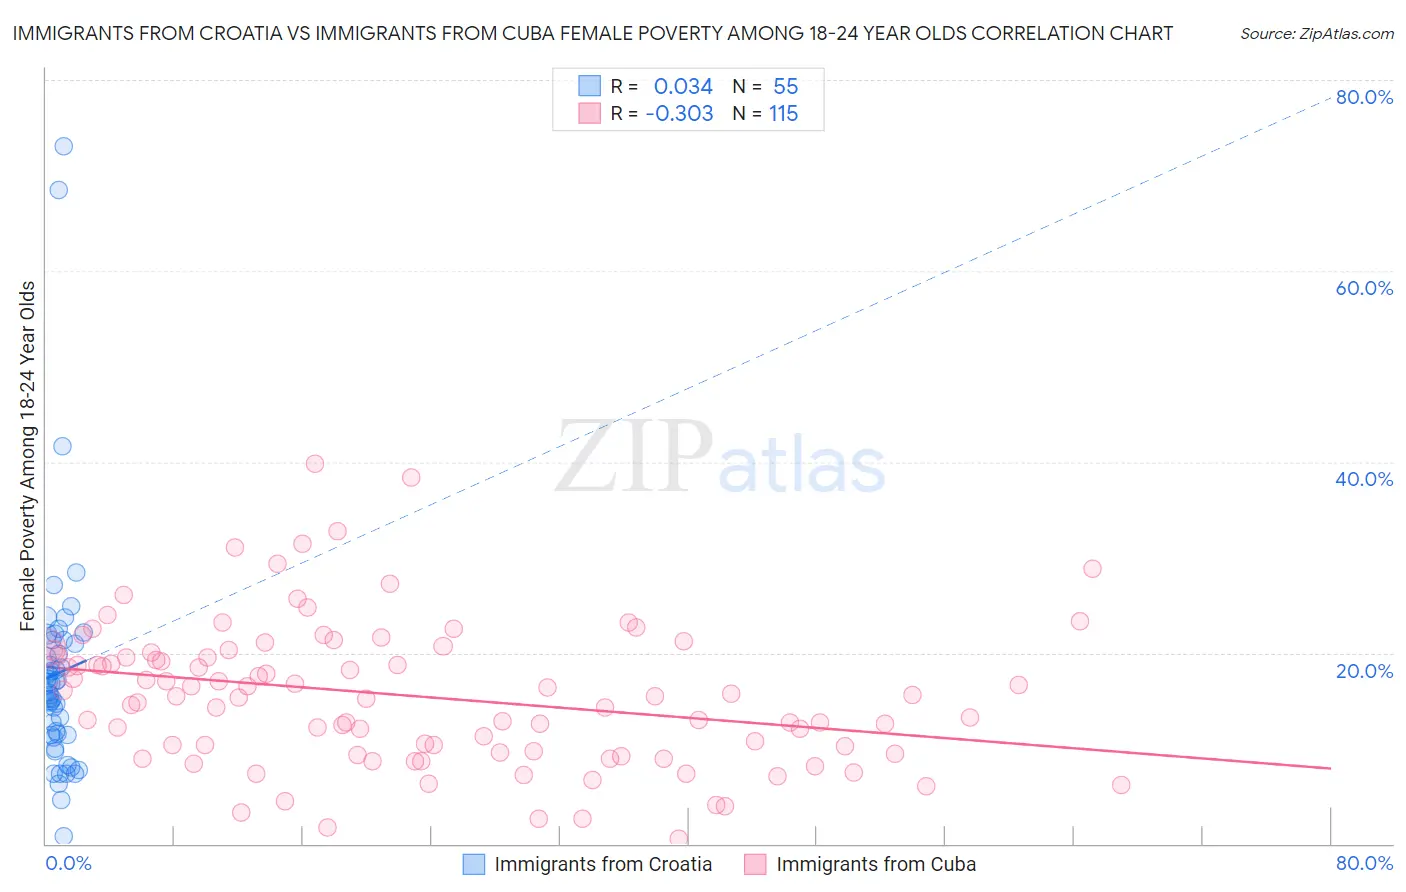 Immigrants from Croatia vs Immigrants from Cuba Female Poverty Among 18-24 Year Olds